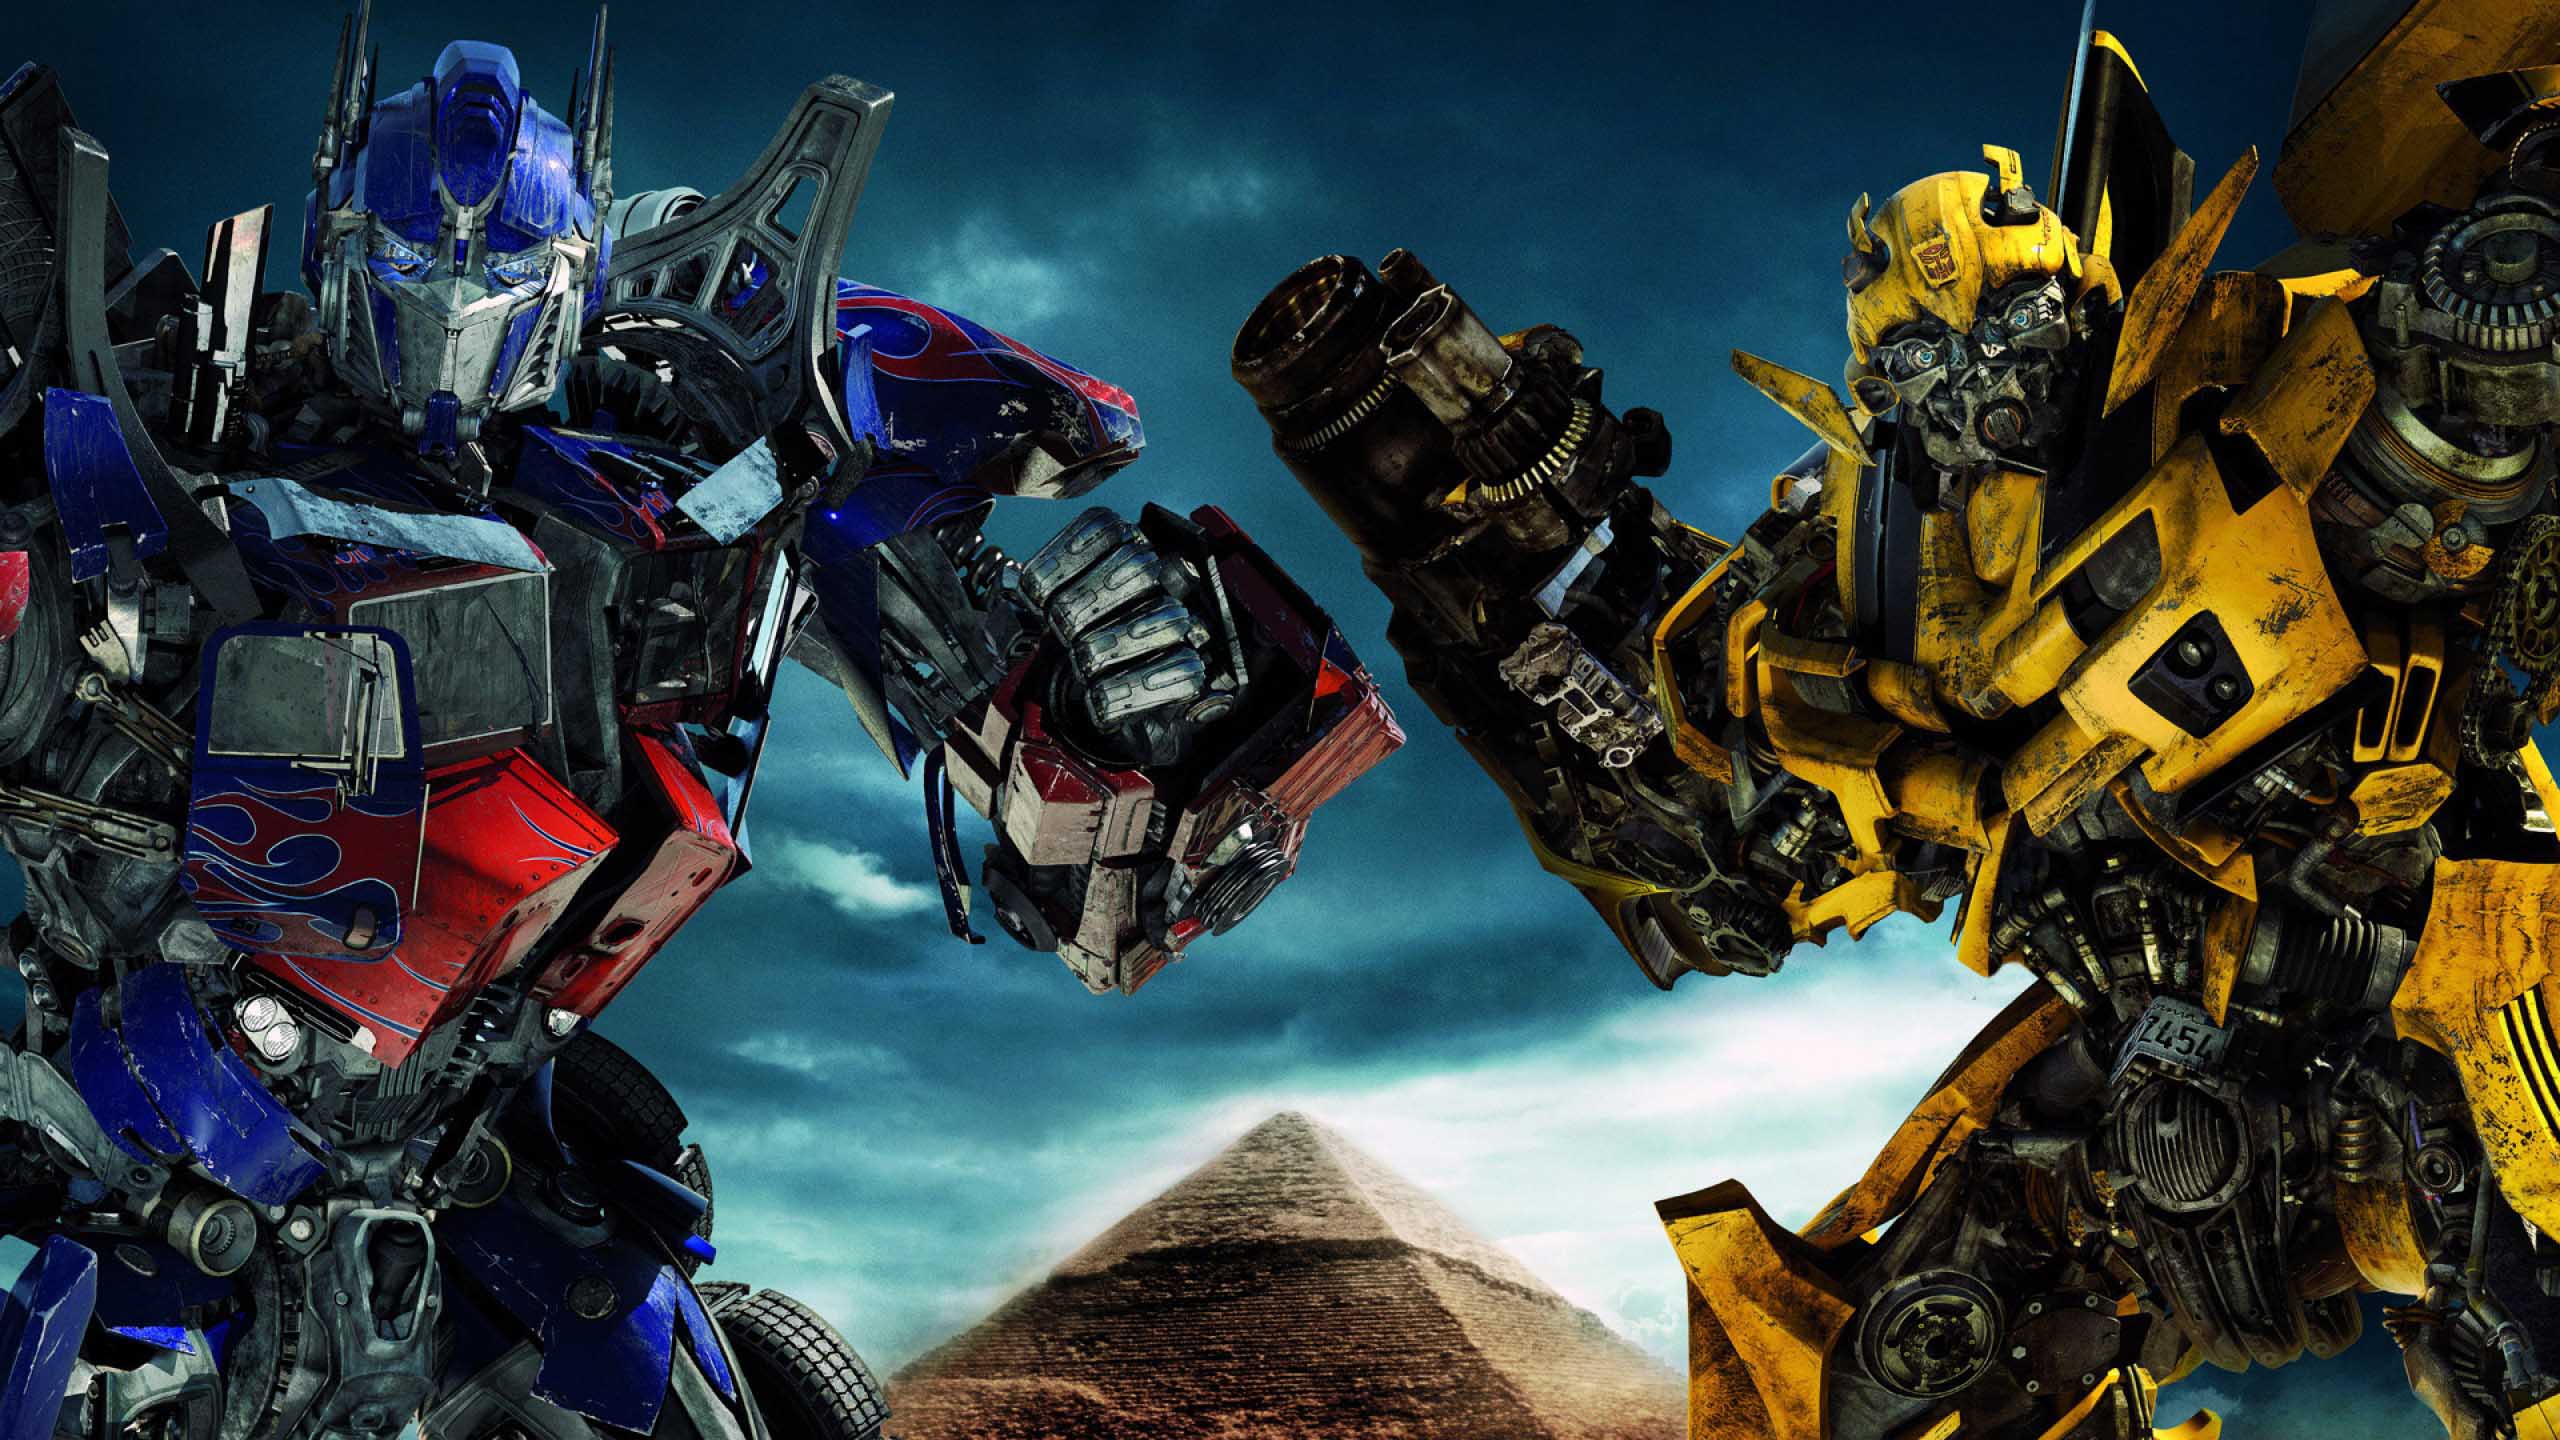 Optimus Prime And Bumblebee, transformers, movie, cybertron ...